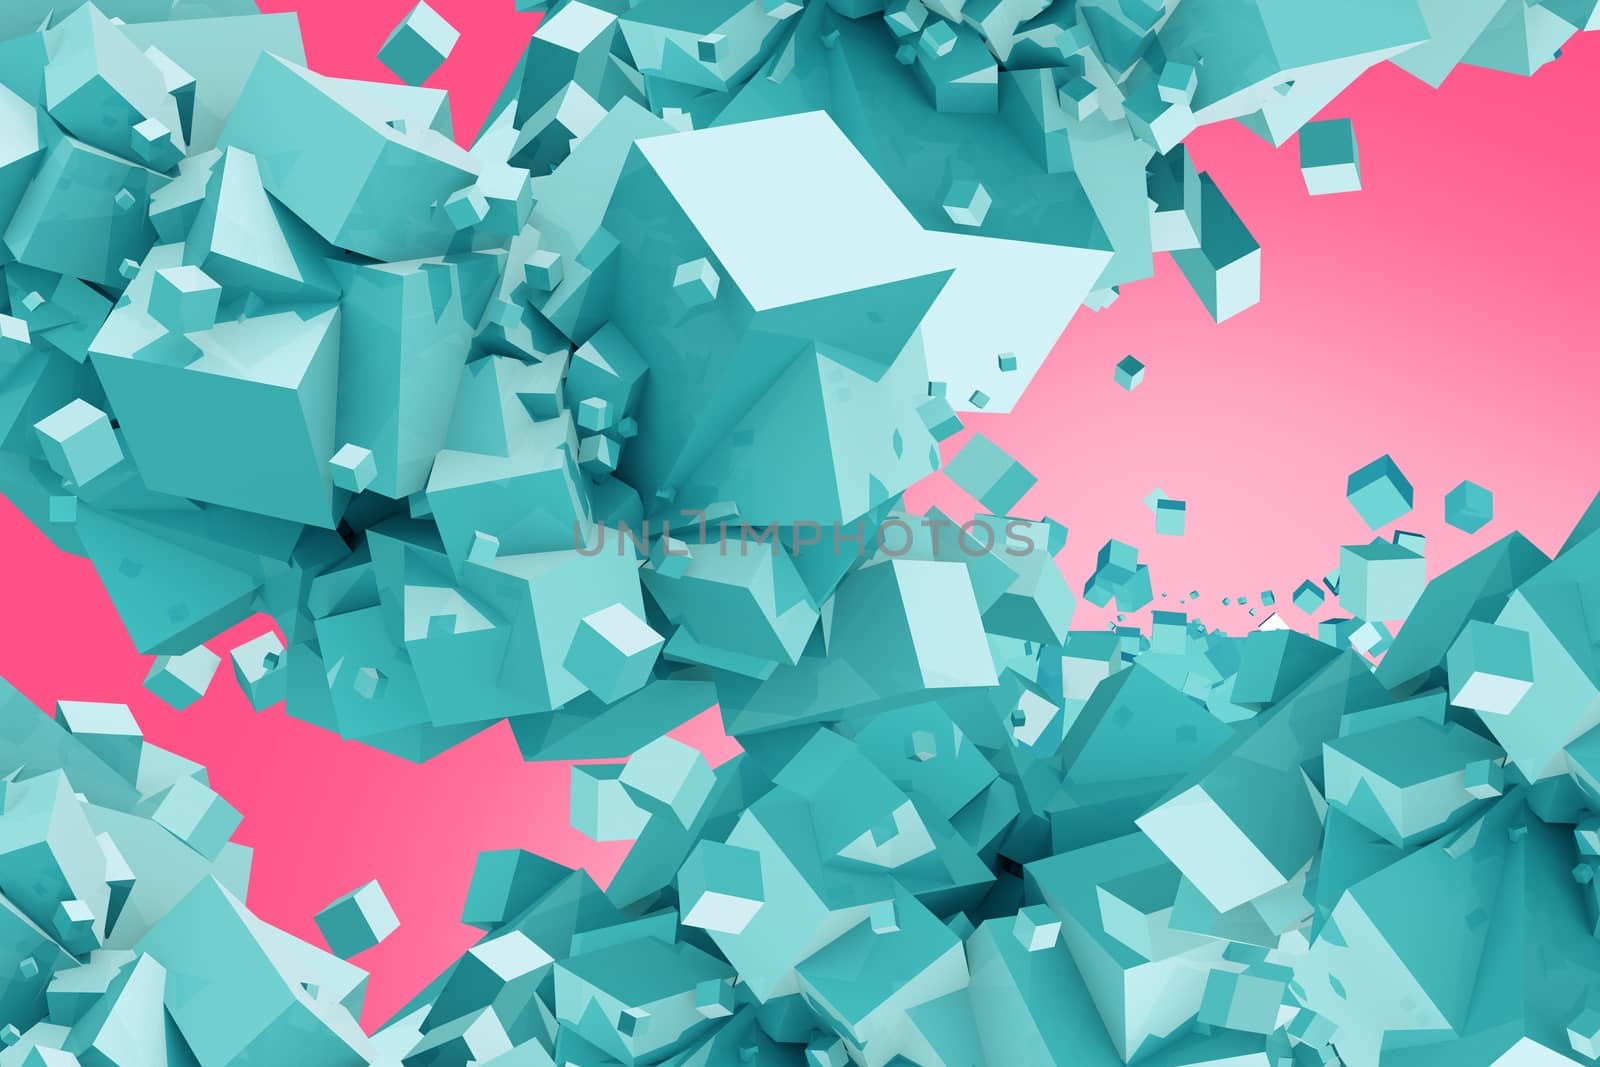 Blue Cubes on Pink Background by welcomia